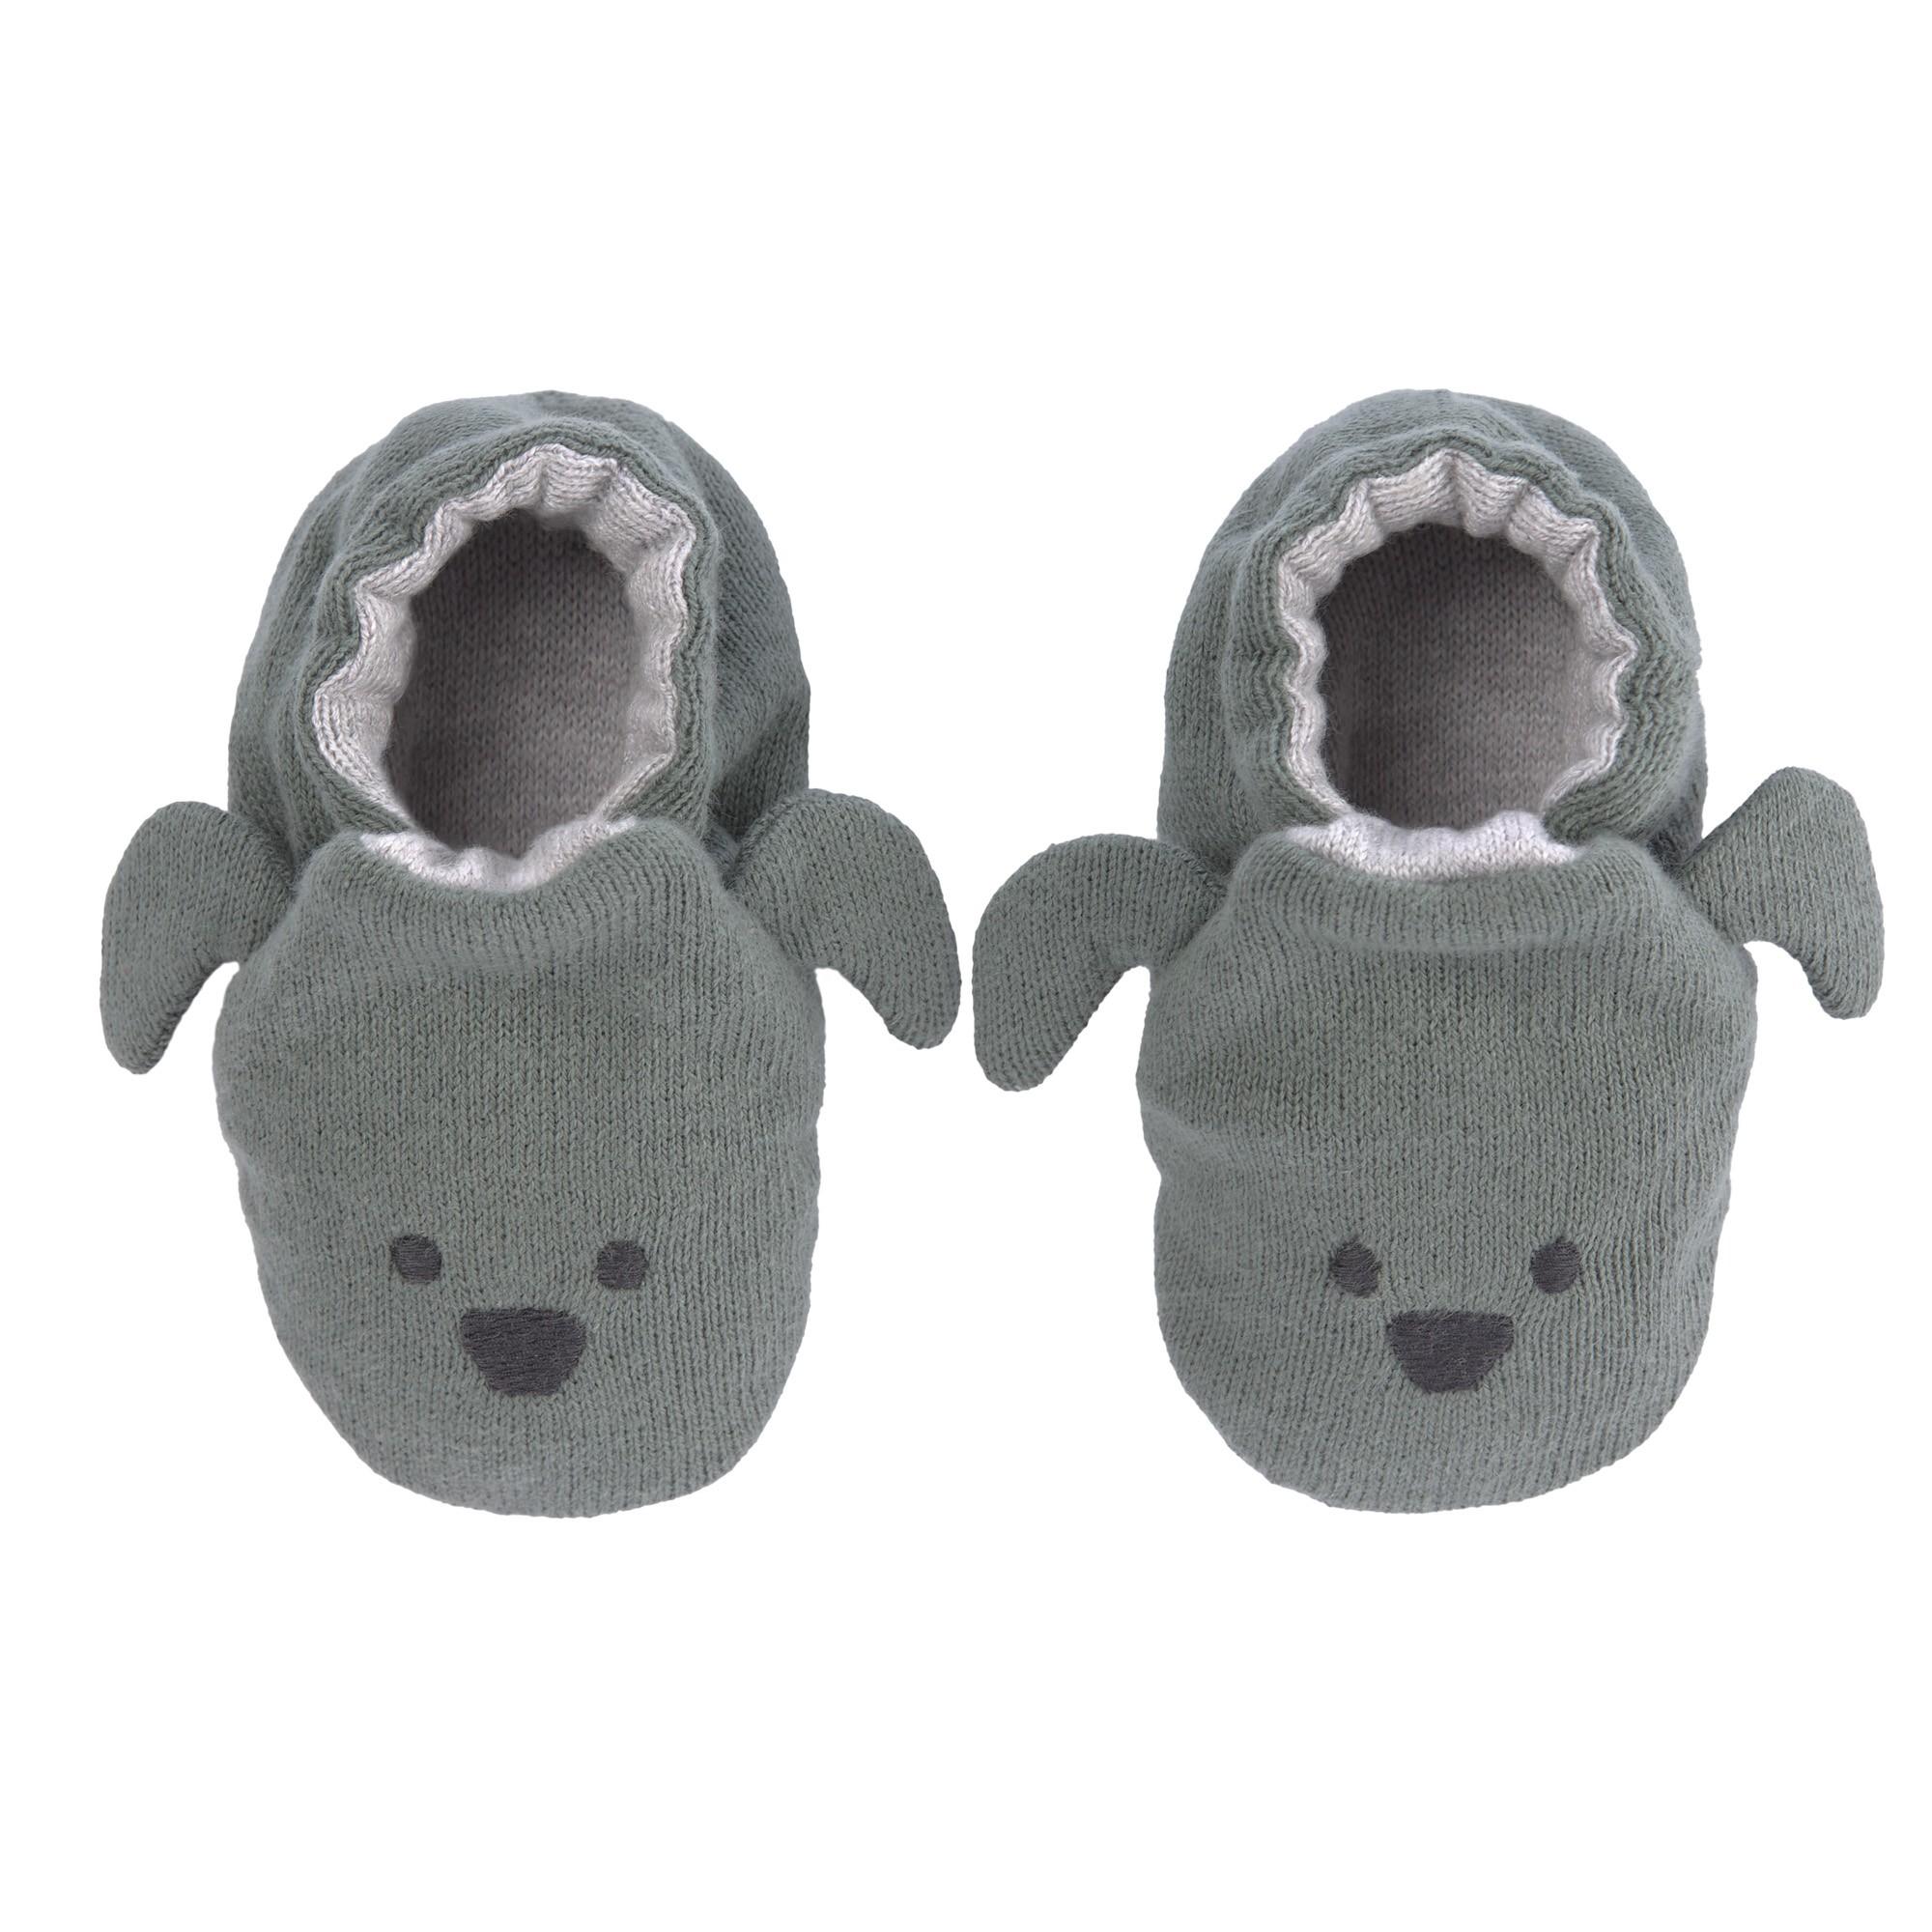 Lassig - Baby shoes gots little chums dog